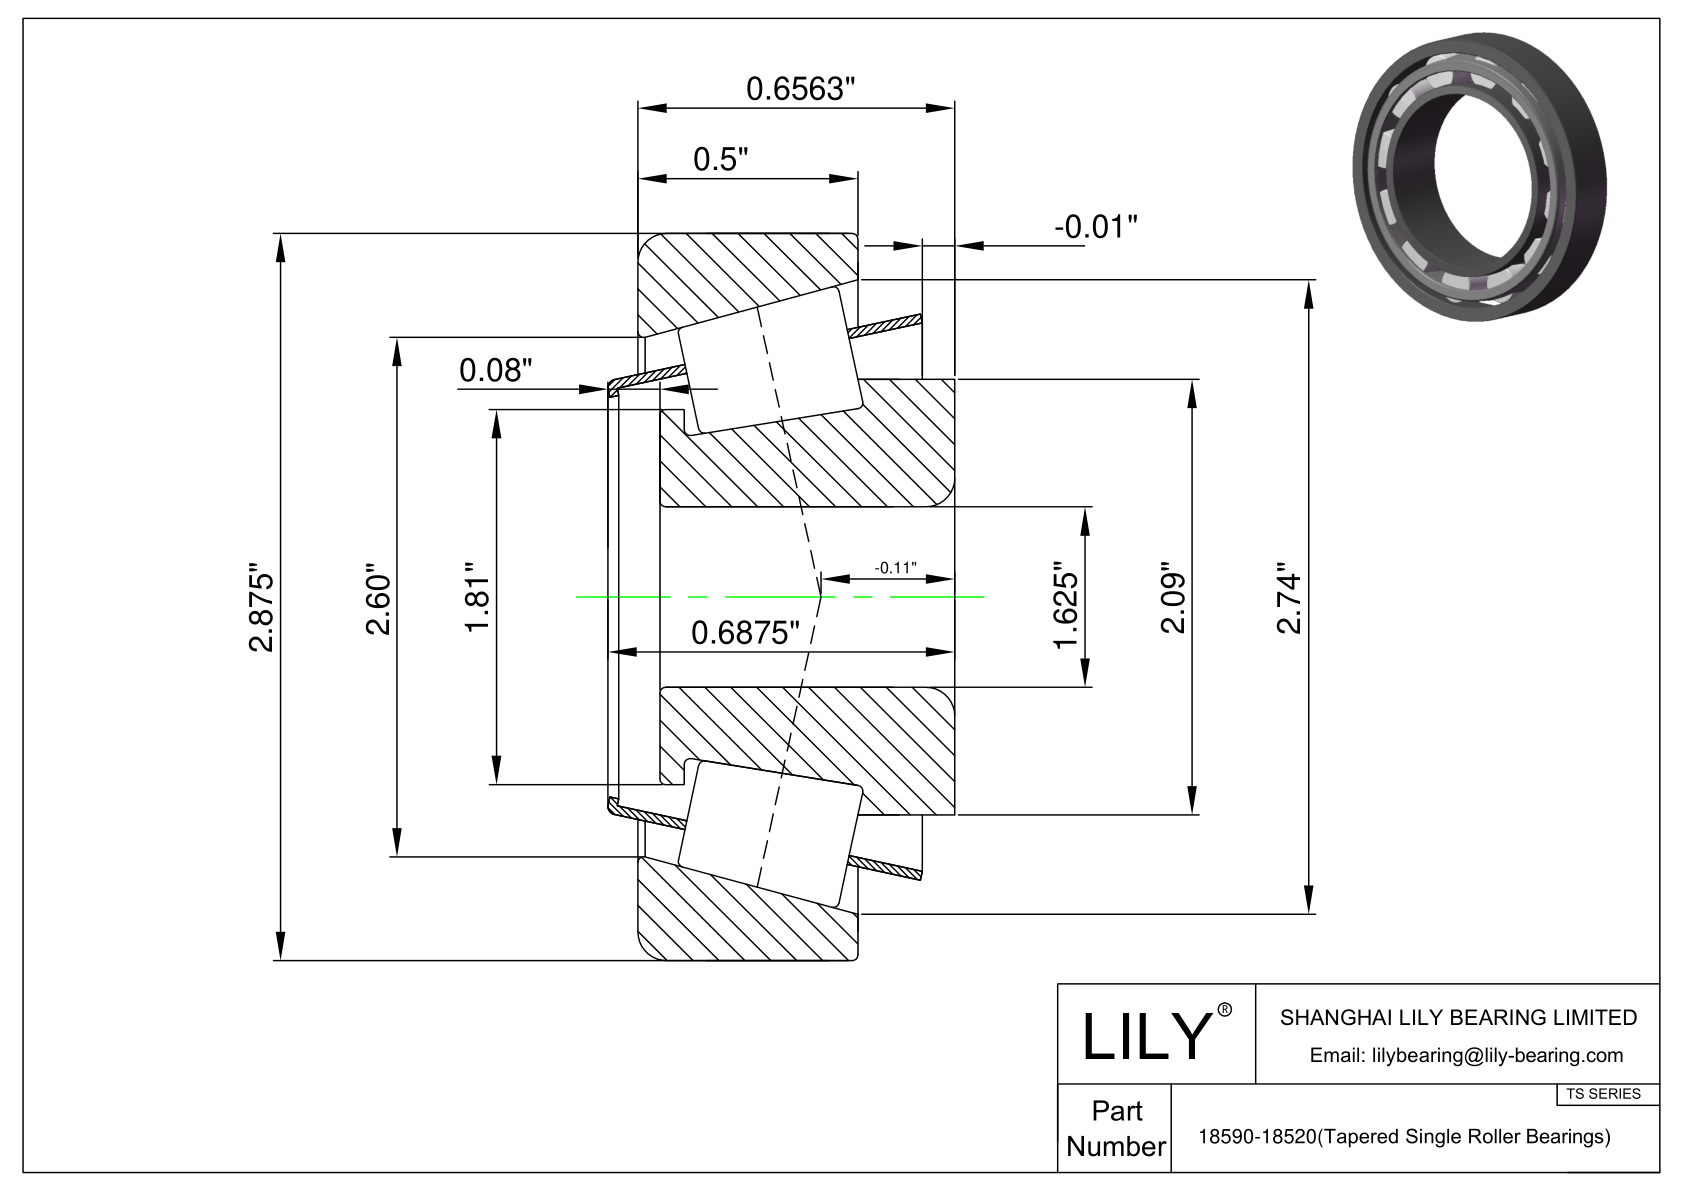 18590-18520 TS (Tapered Single Roller Bearings) (Imperial) cad drawing